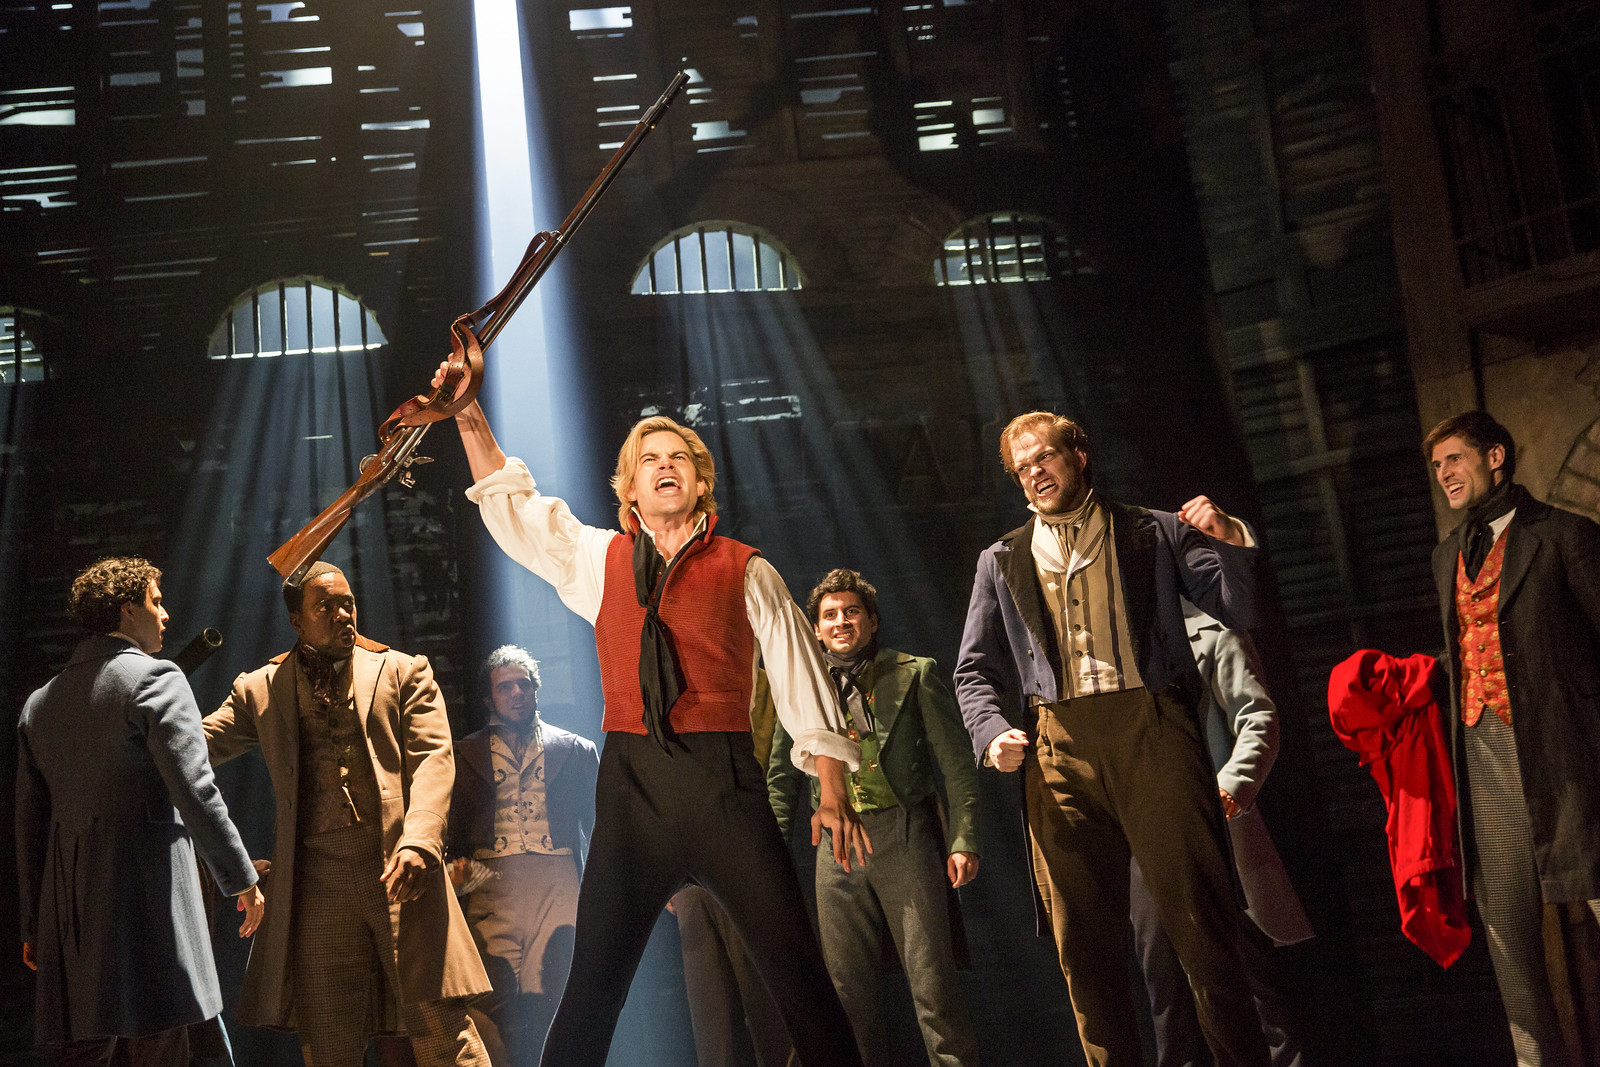 Matt Shingledecker as Enjolras in the new national tour of Les Miserables (photo: Matthew Murphy) // Broadway in Detroit: Les Miserables At The Fisher Theatre - Wading in Big Shoes